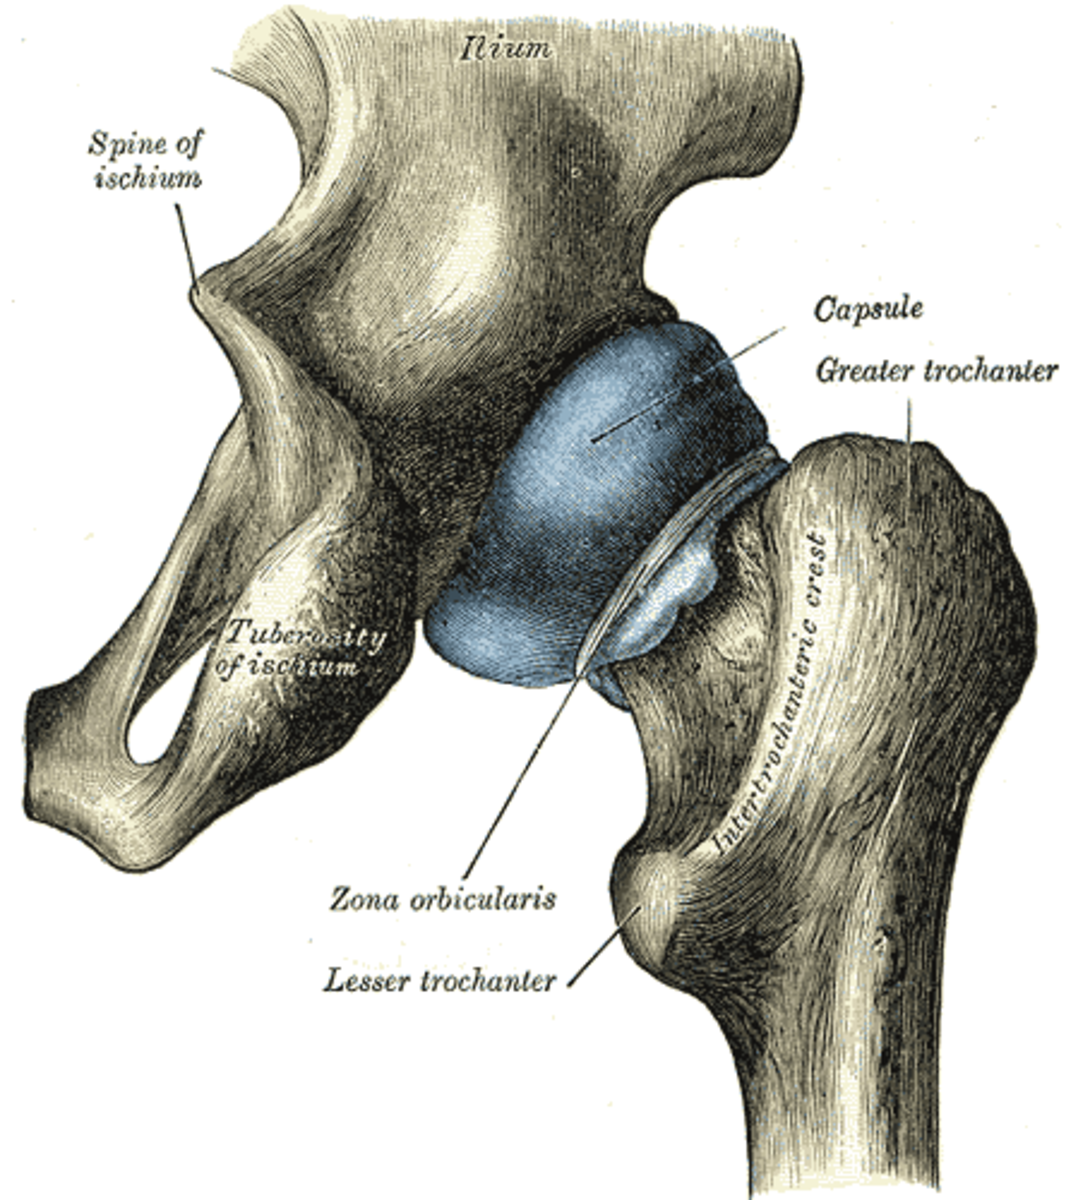 Hip capsule enveloping the ball and socket hip joint